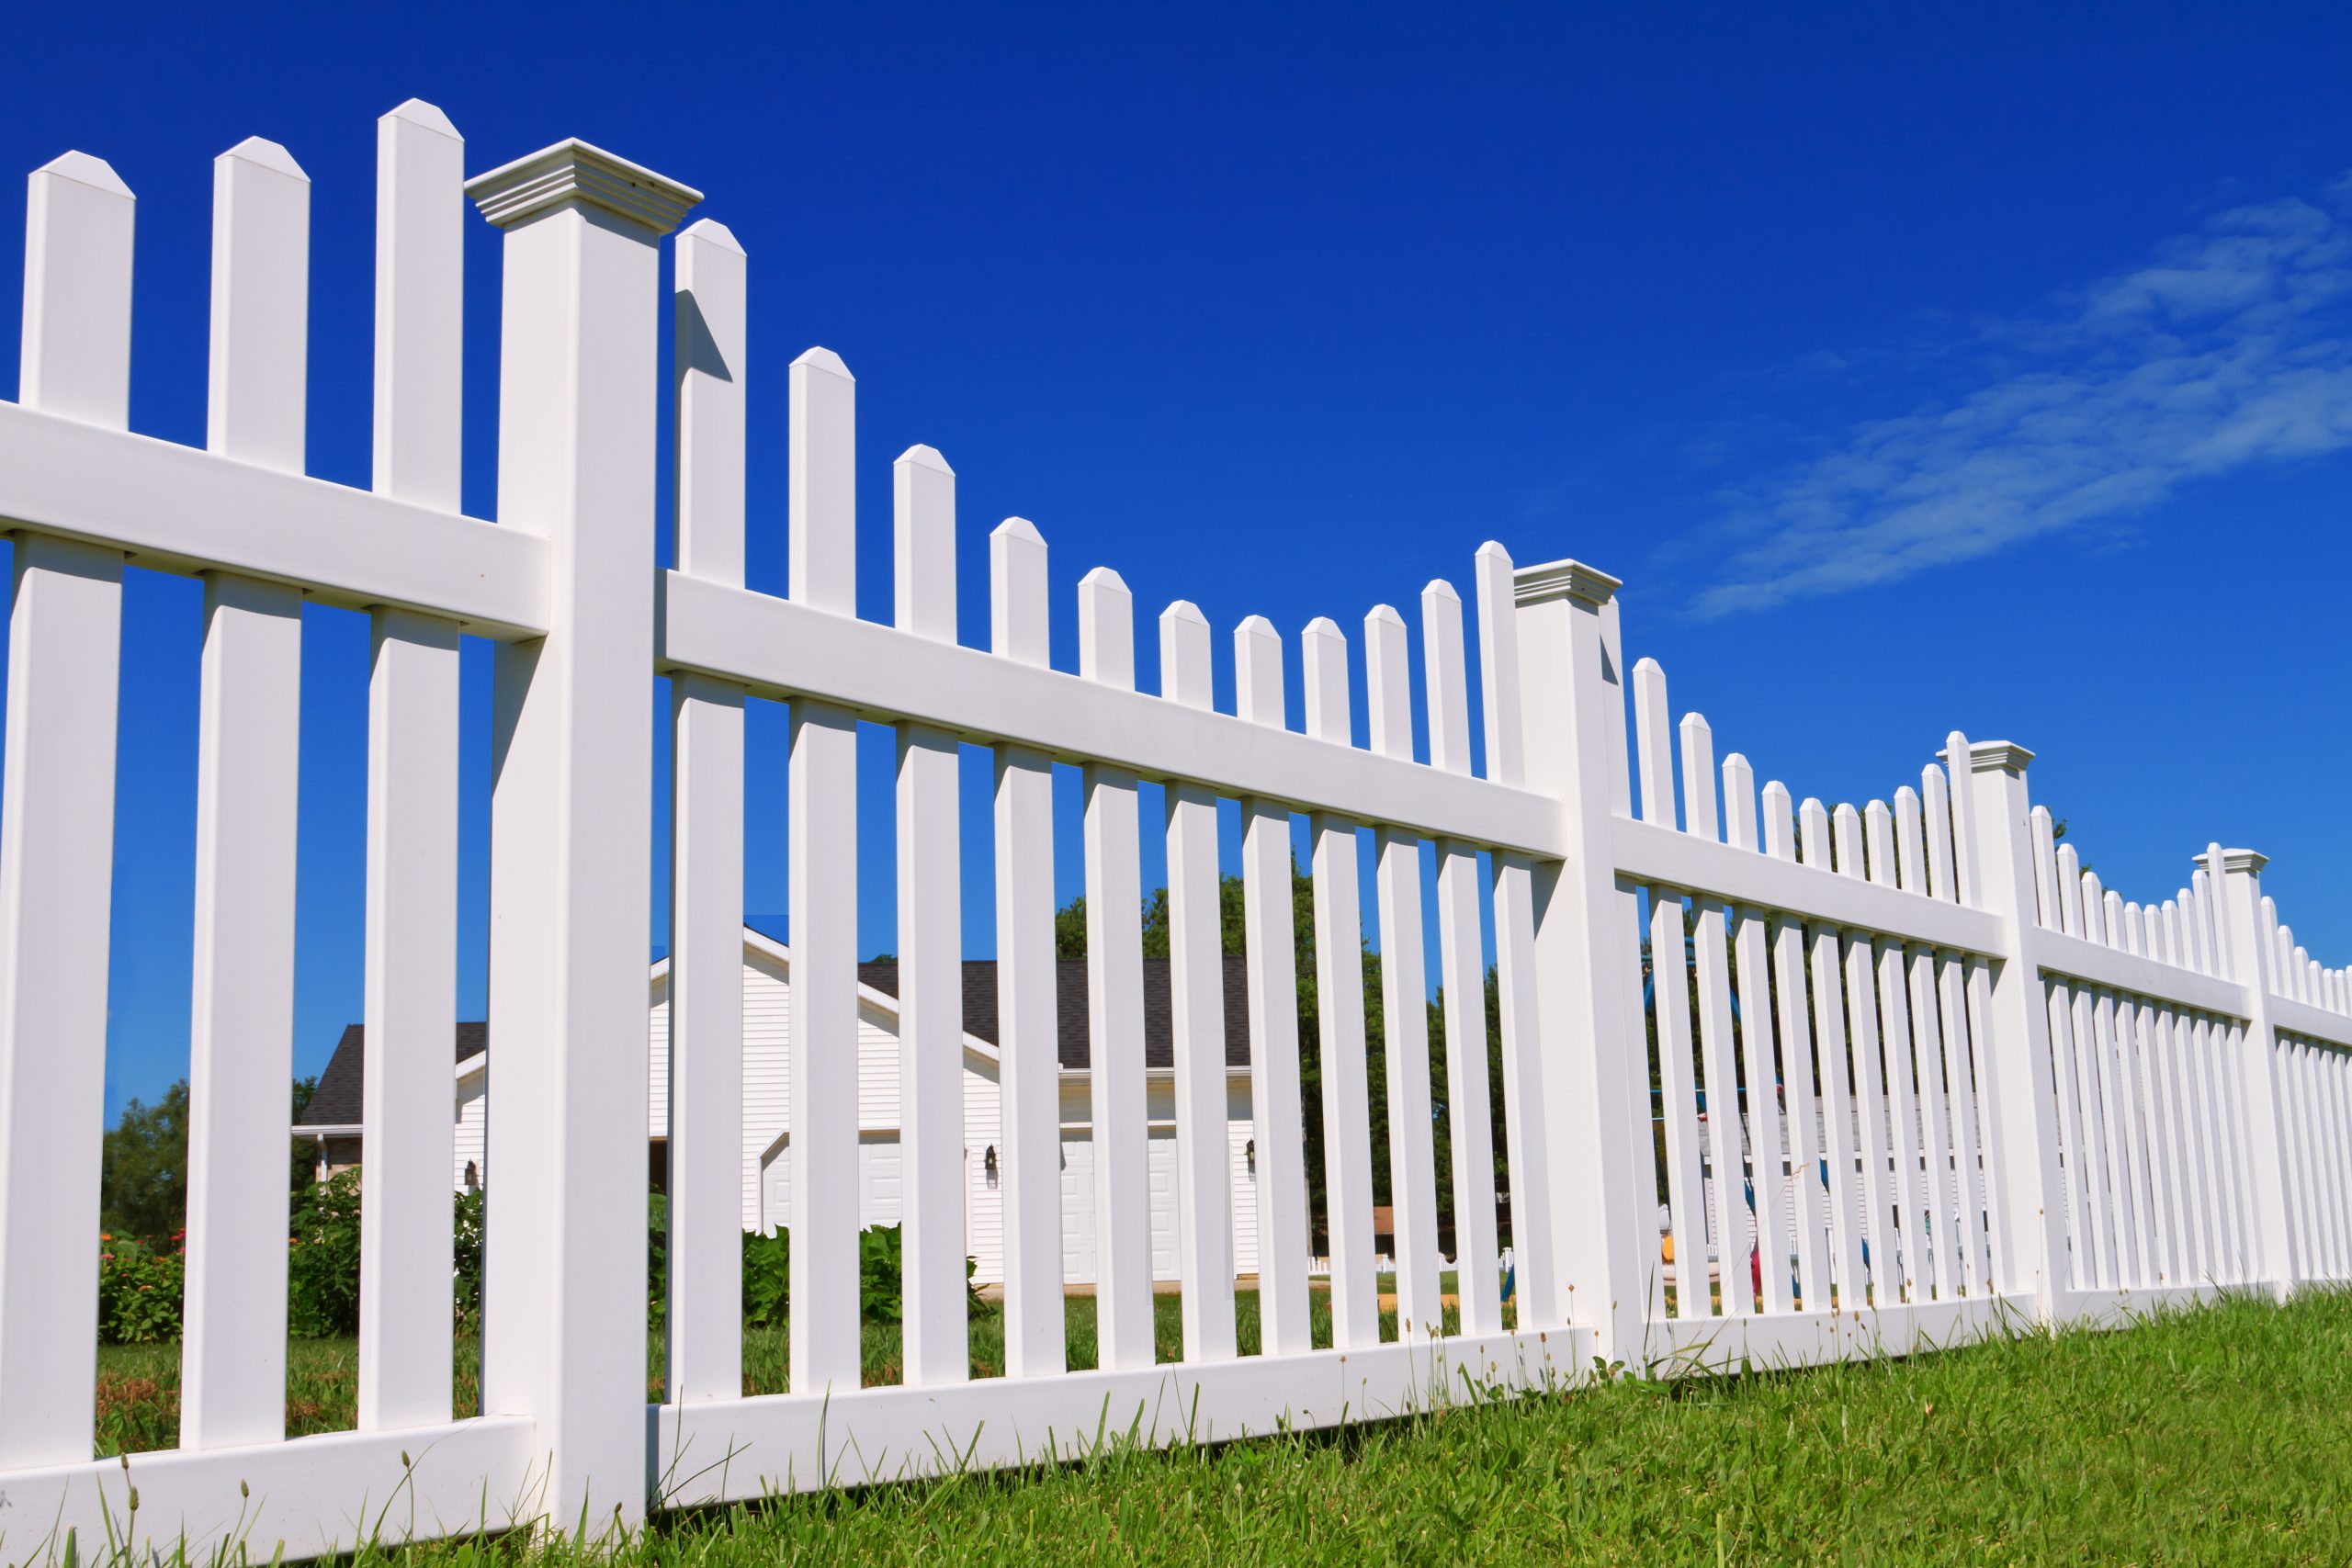 Professional Fence Installation in Fort Collins, CO, Is a Must When a New Fence Is Needed